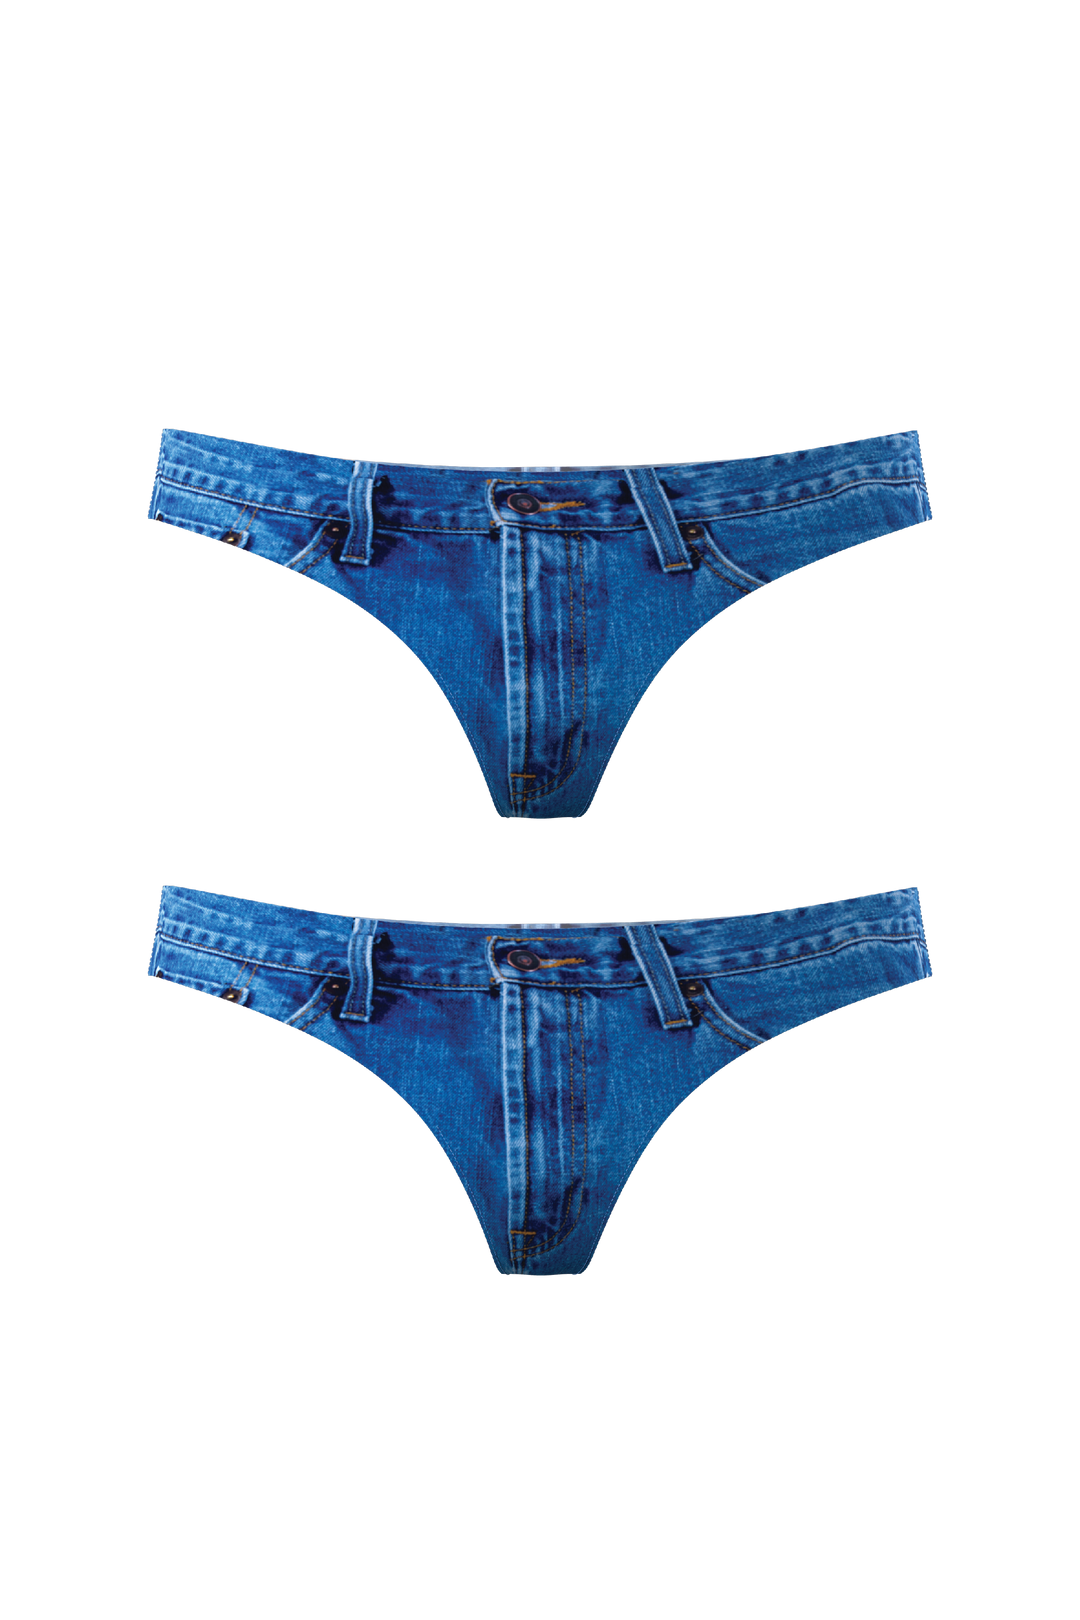 Denim Thong Couples Matching Underwear 2 Pack The Jeanstring 3435